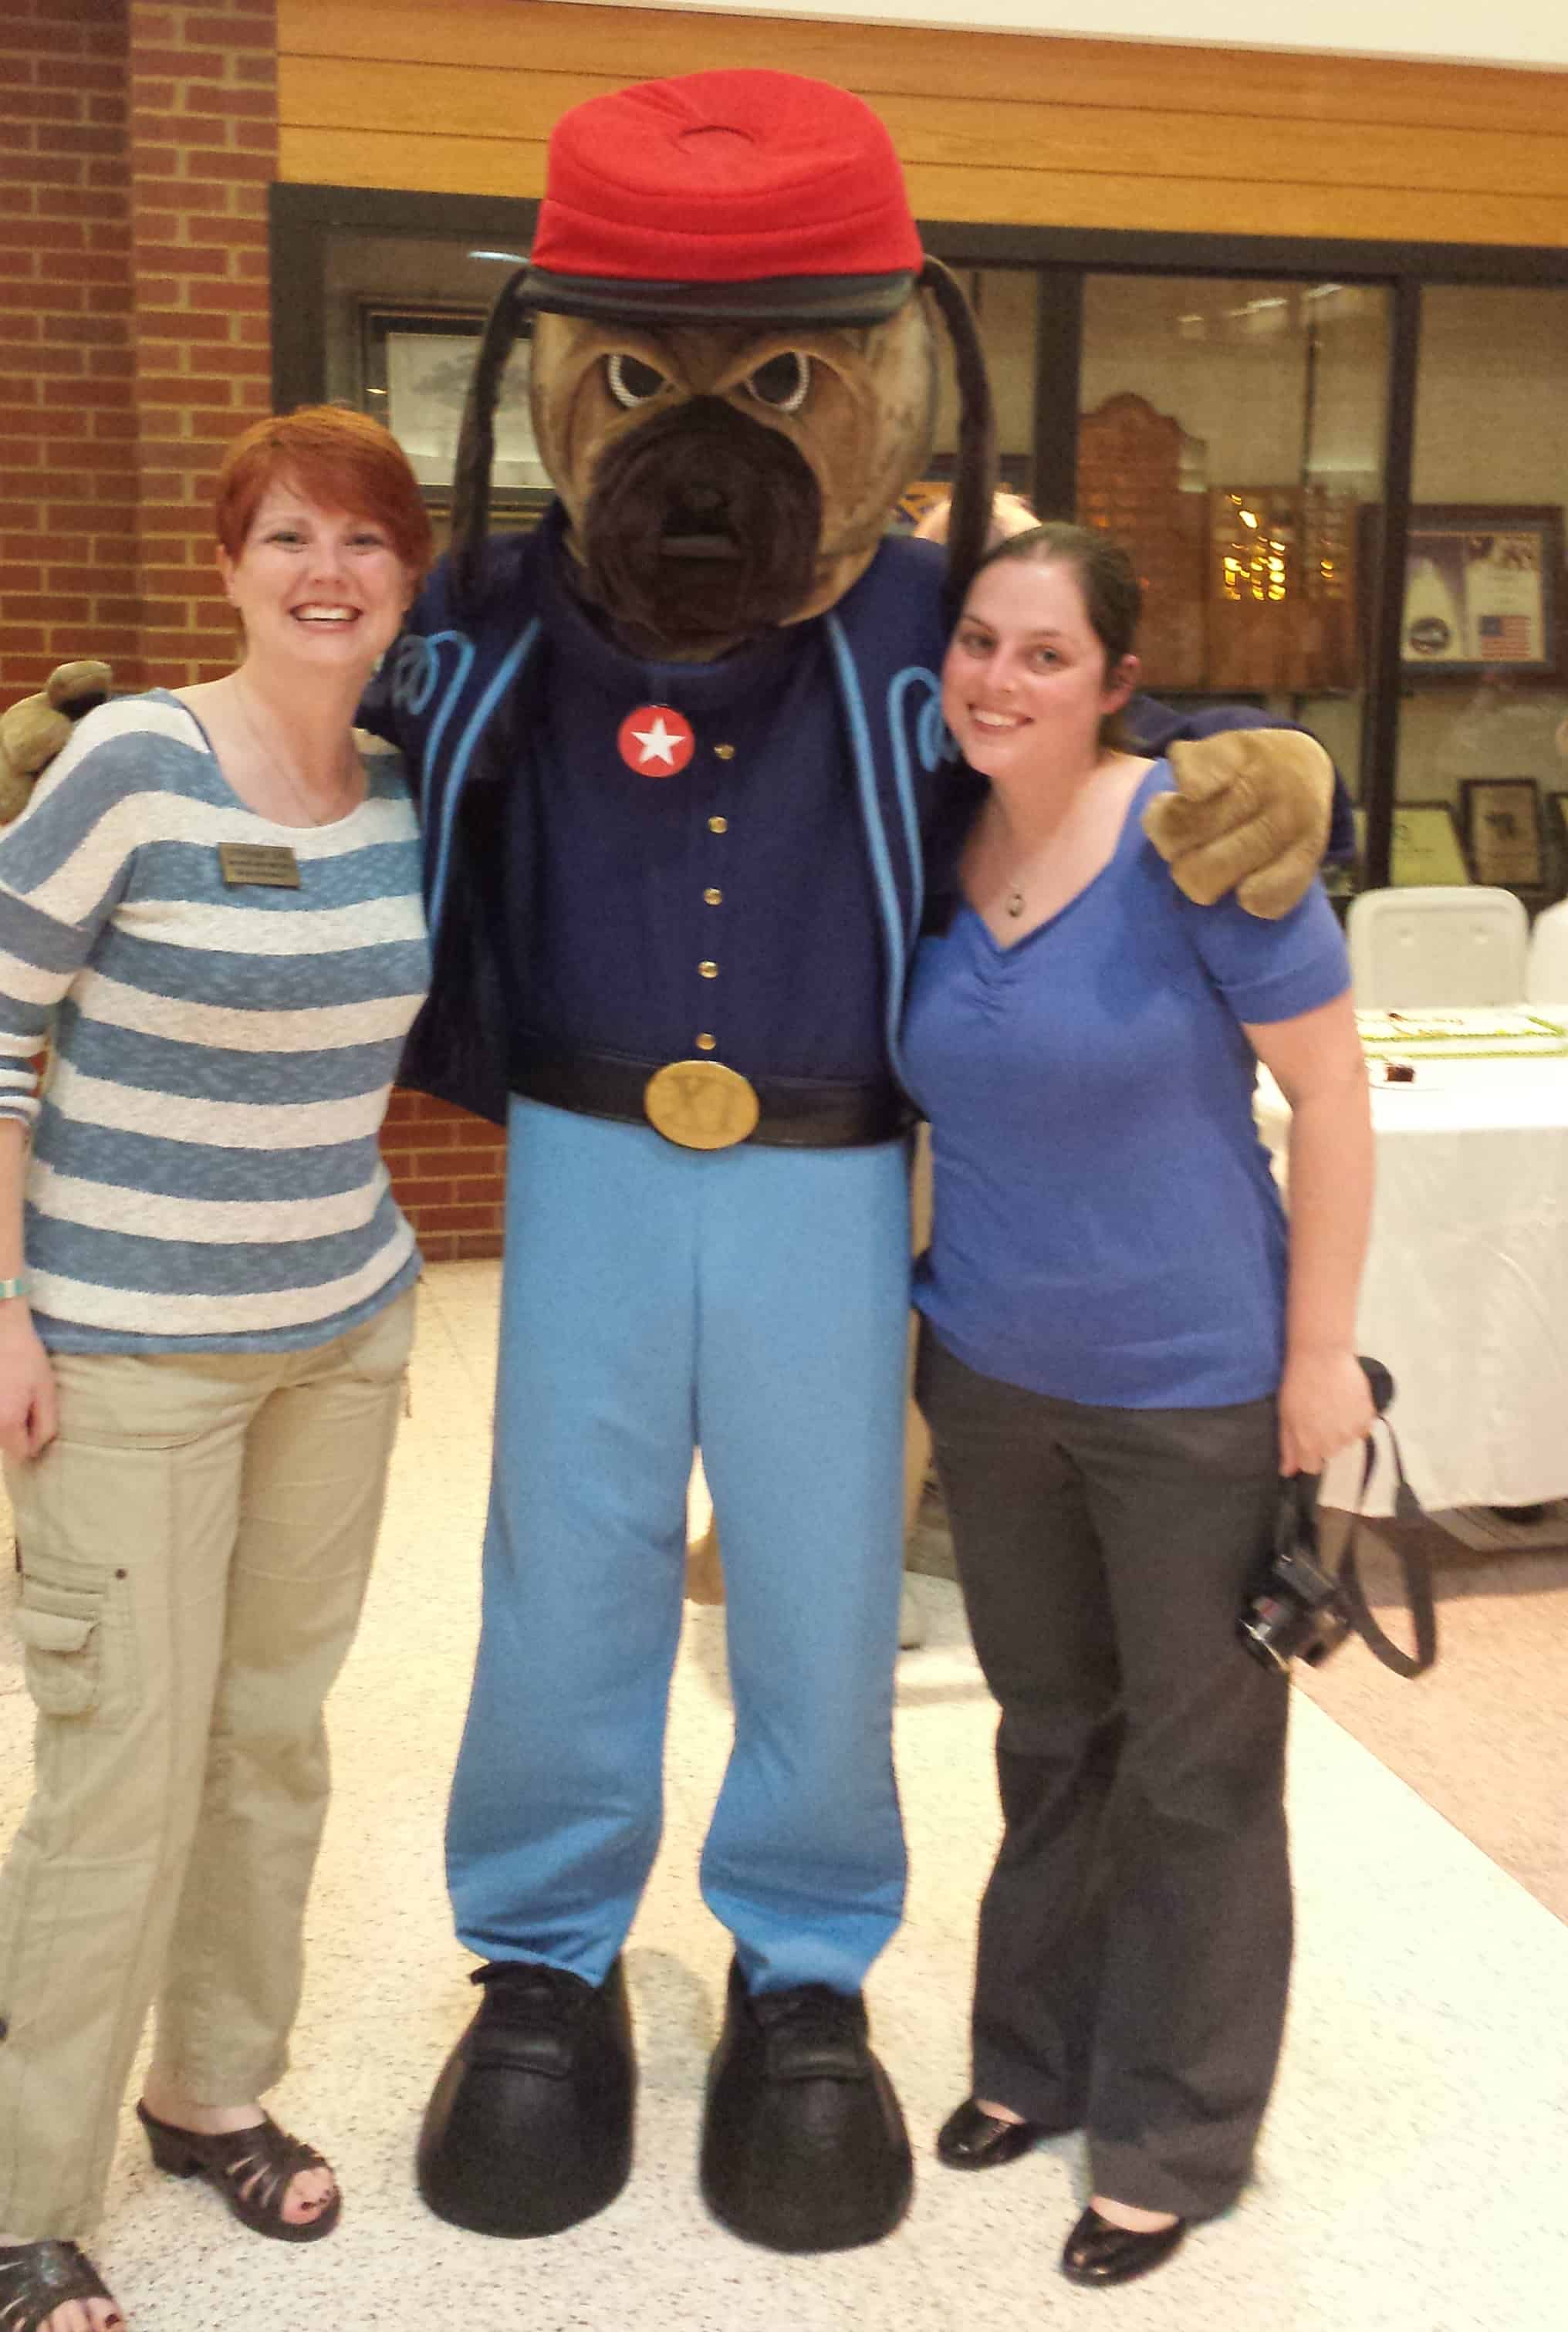 Visitor Services Coordinator Stephanie Cain and Associate Director Amanda McGuire pose with Zeke, the Indy Eleven's Zouave-uniform-clad mascot